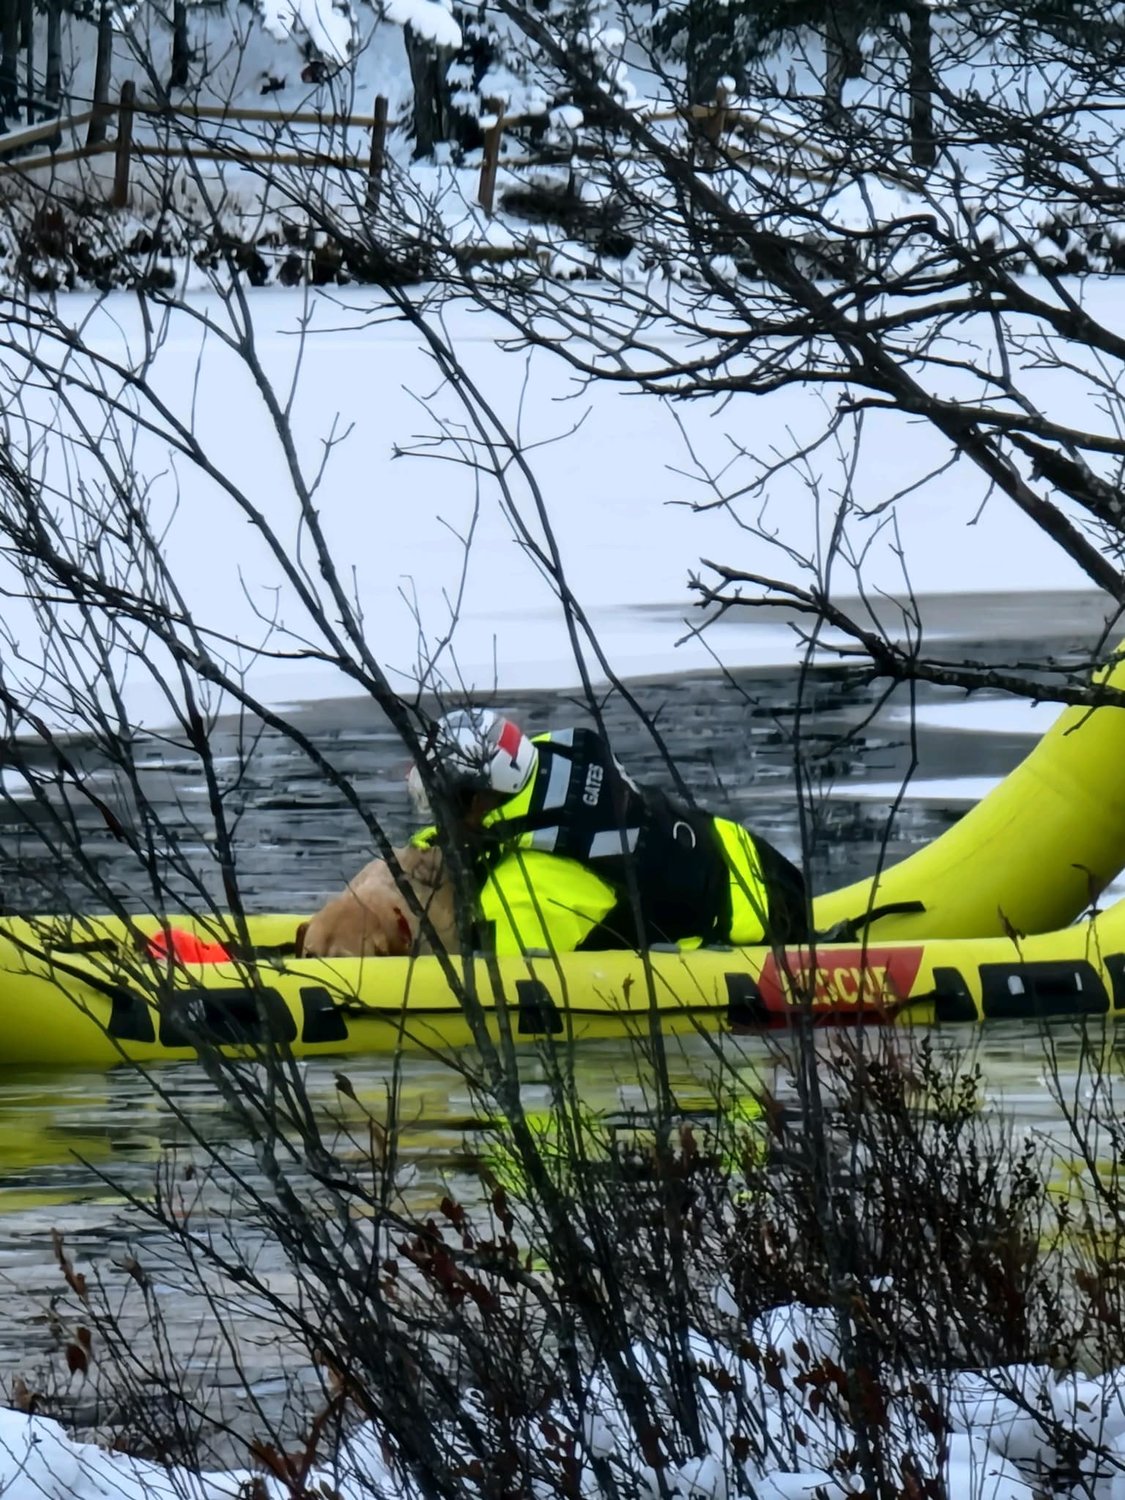 A yellow Labrador Retriever rescued out of icy Snowbird Lake on Saturday rests in the safety of the Trenton ice water rescue team's inflatable raft. Fire department officials said the dog got a clean bill of health from a local veterinarian following the rescue.